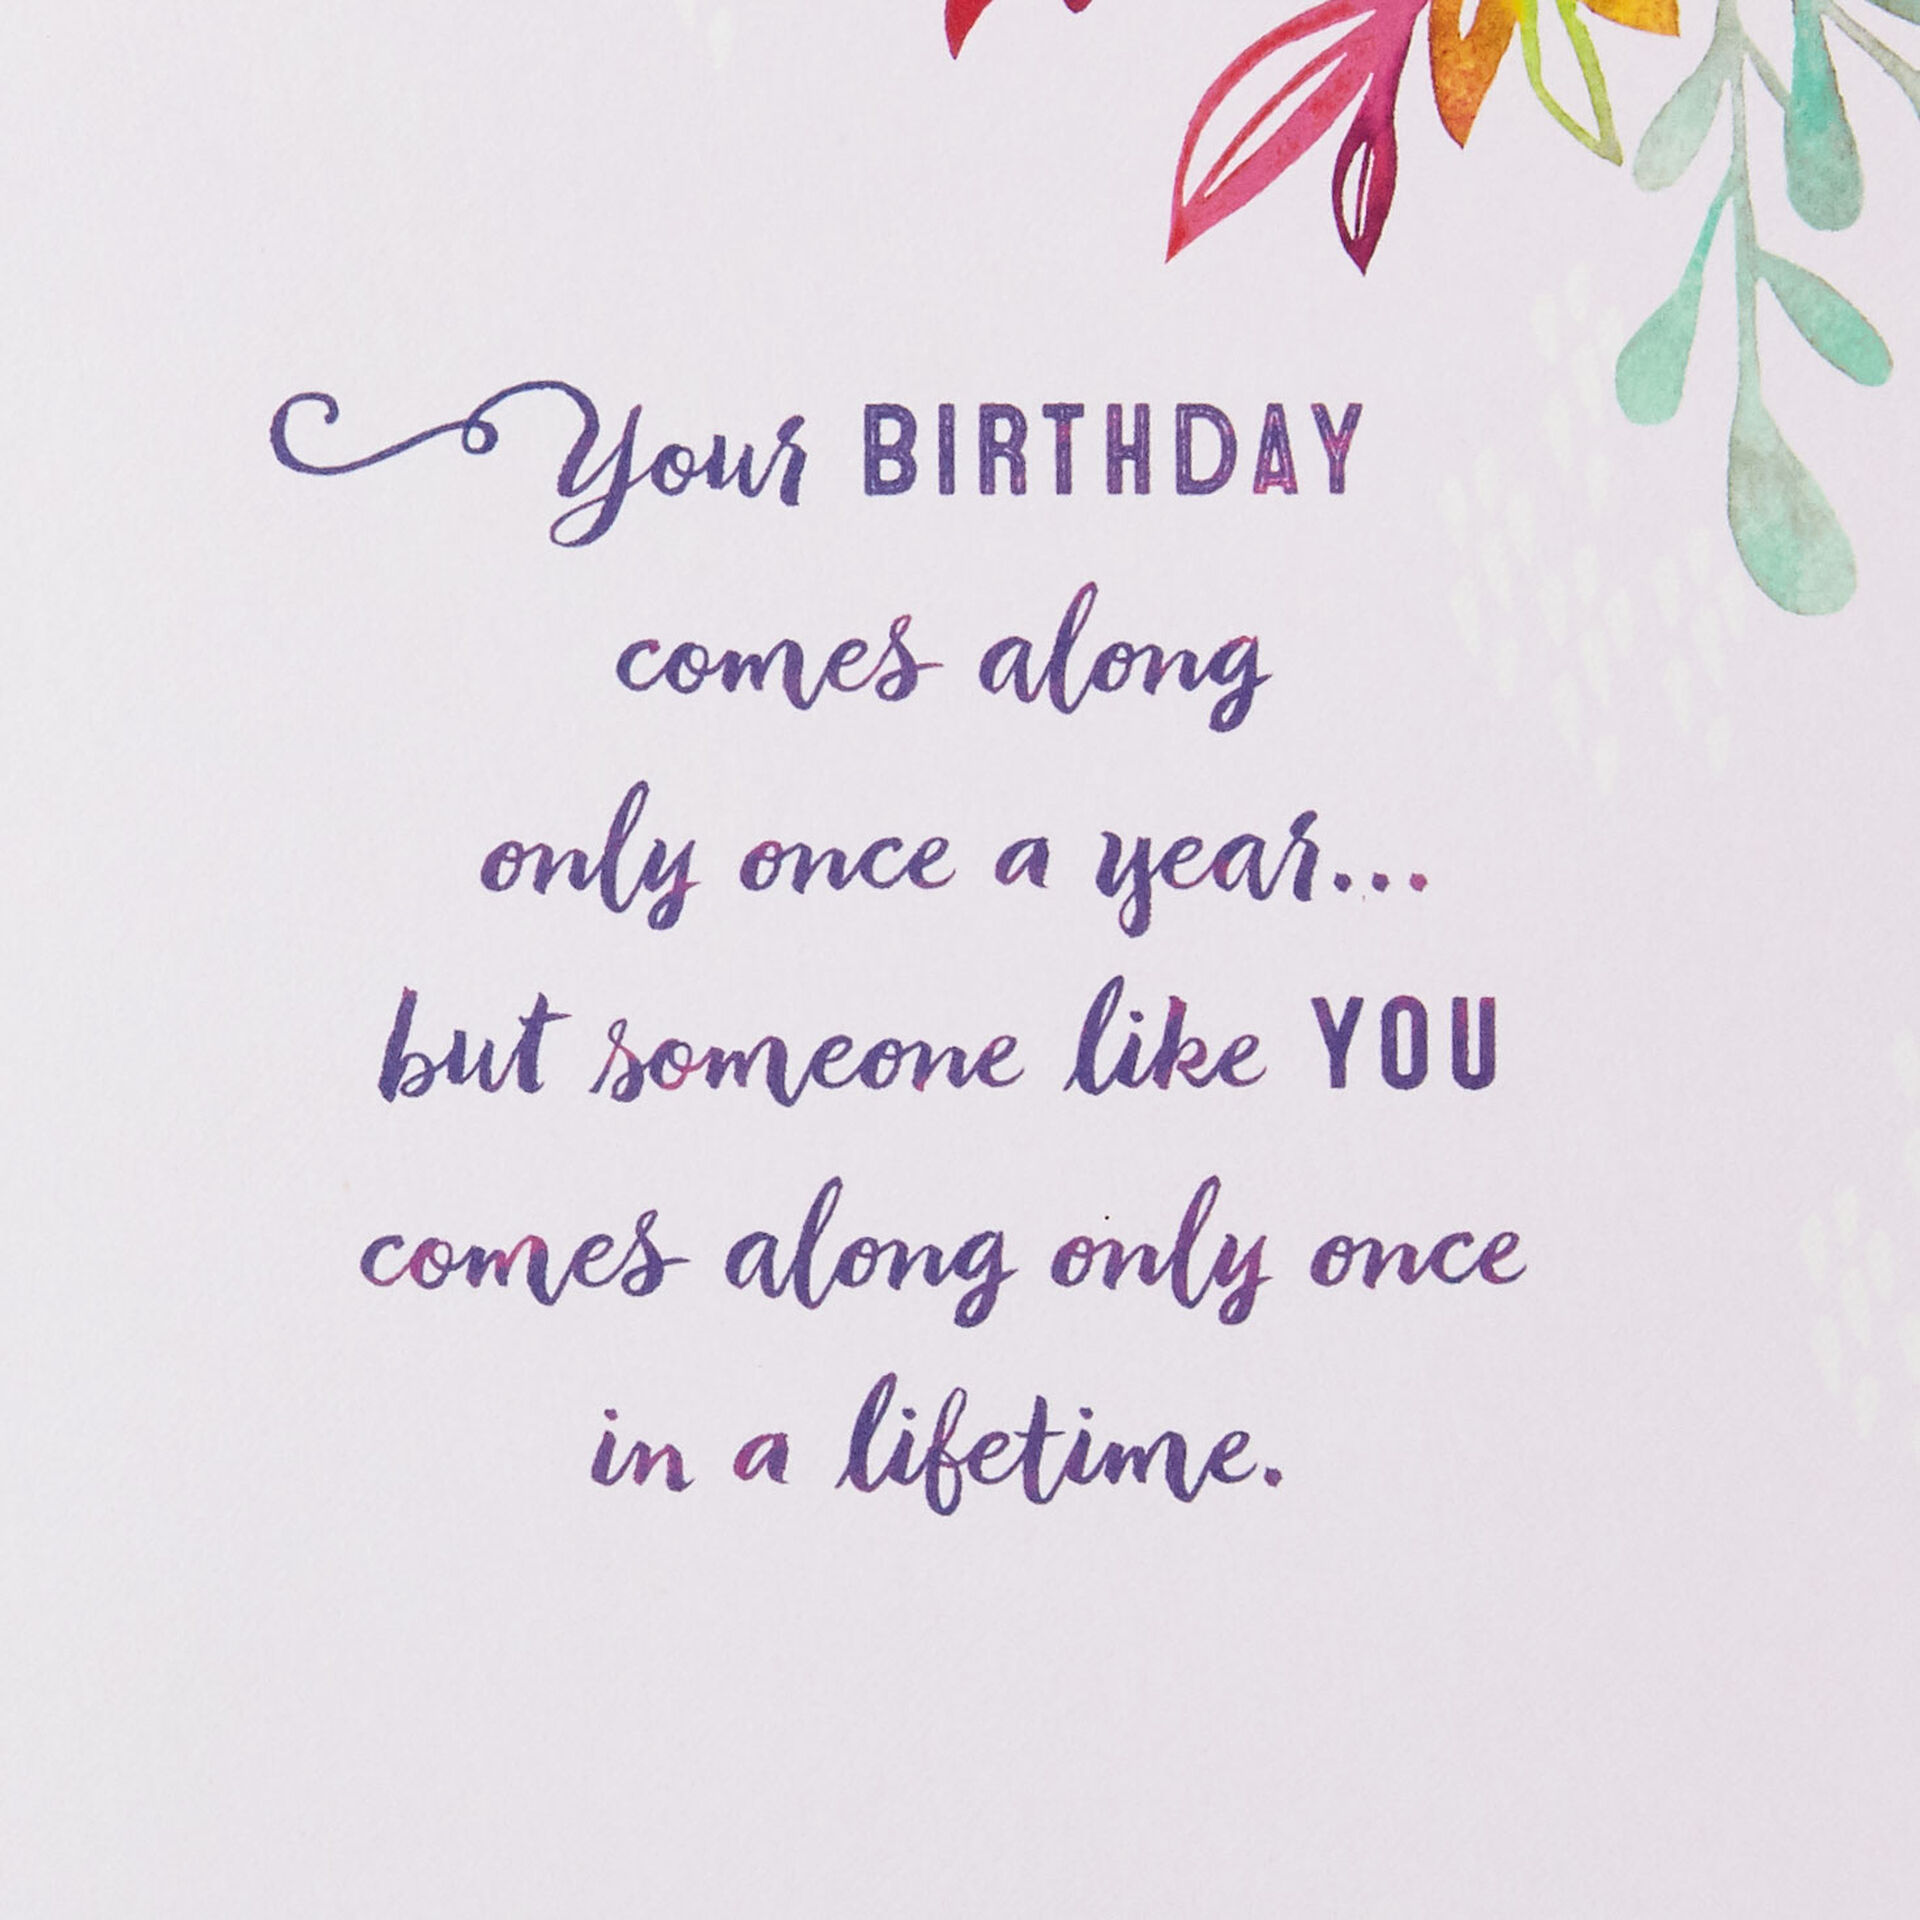 Bright-Flower-Illustrations-Birthday-Card-for-Her_659HBD3307_02